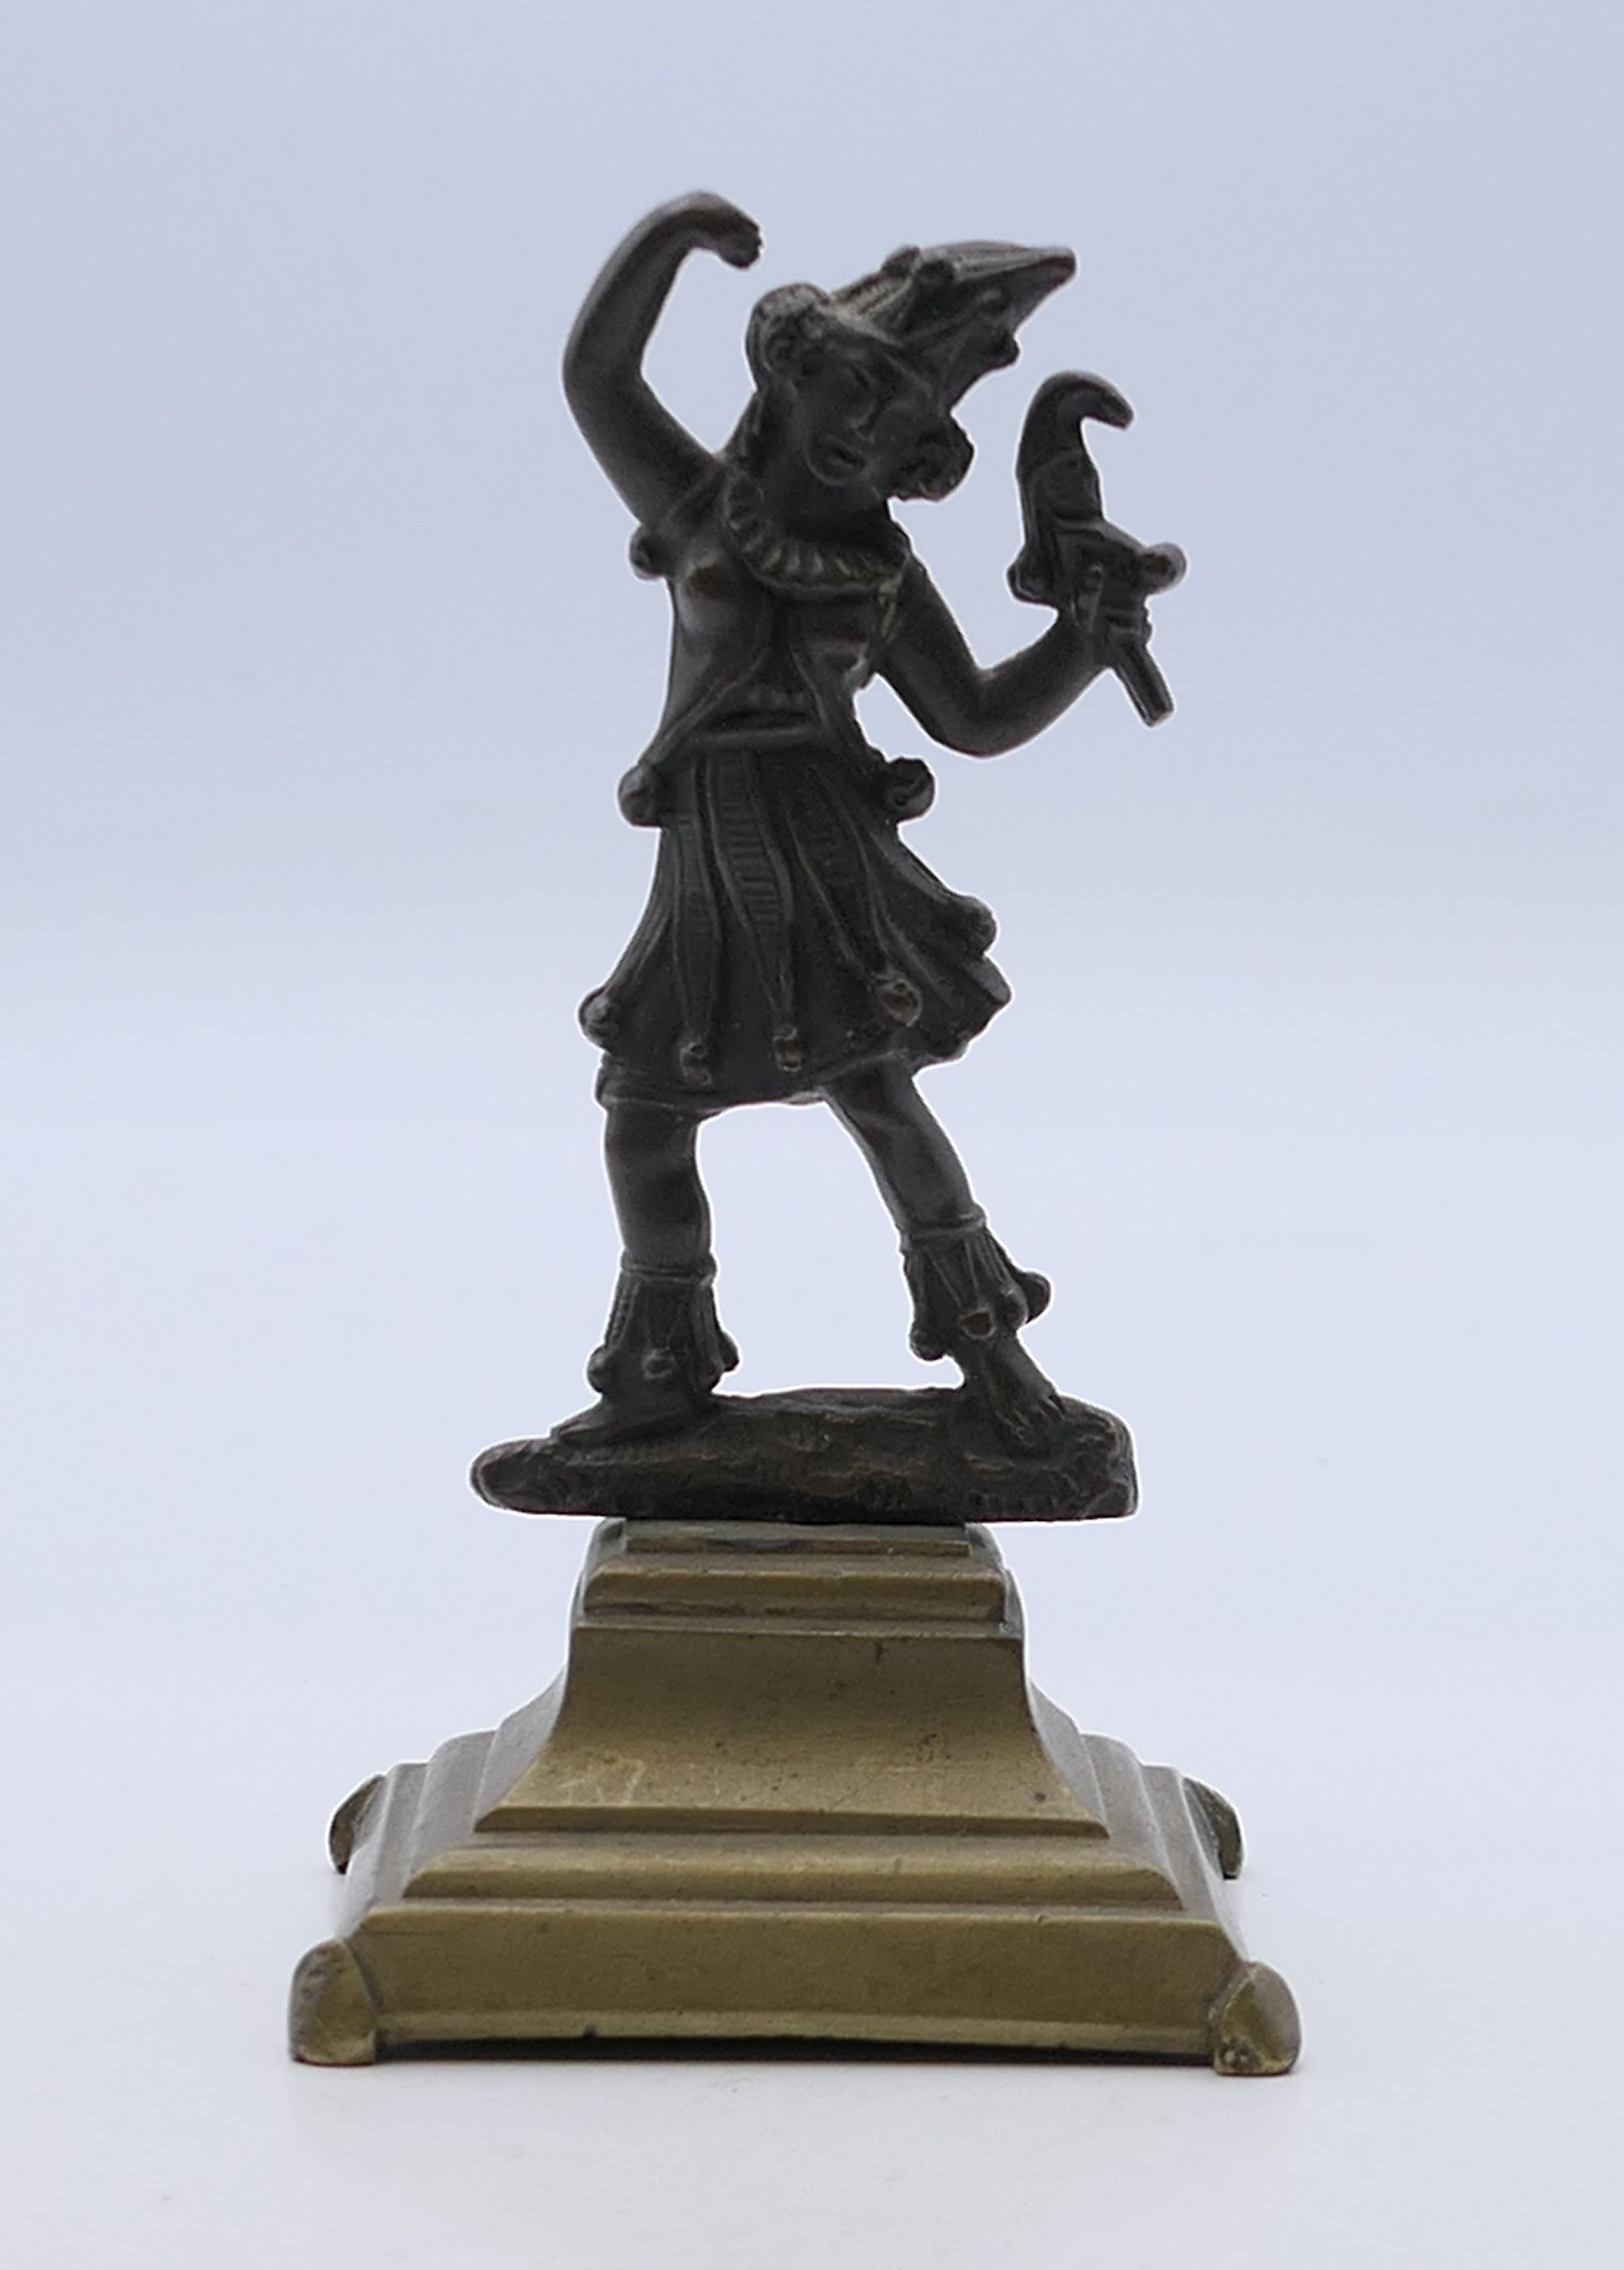 A 19th century bronze model of a jester mounted on a brass base. 10 cm high.